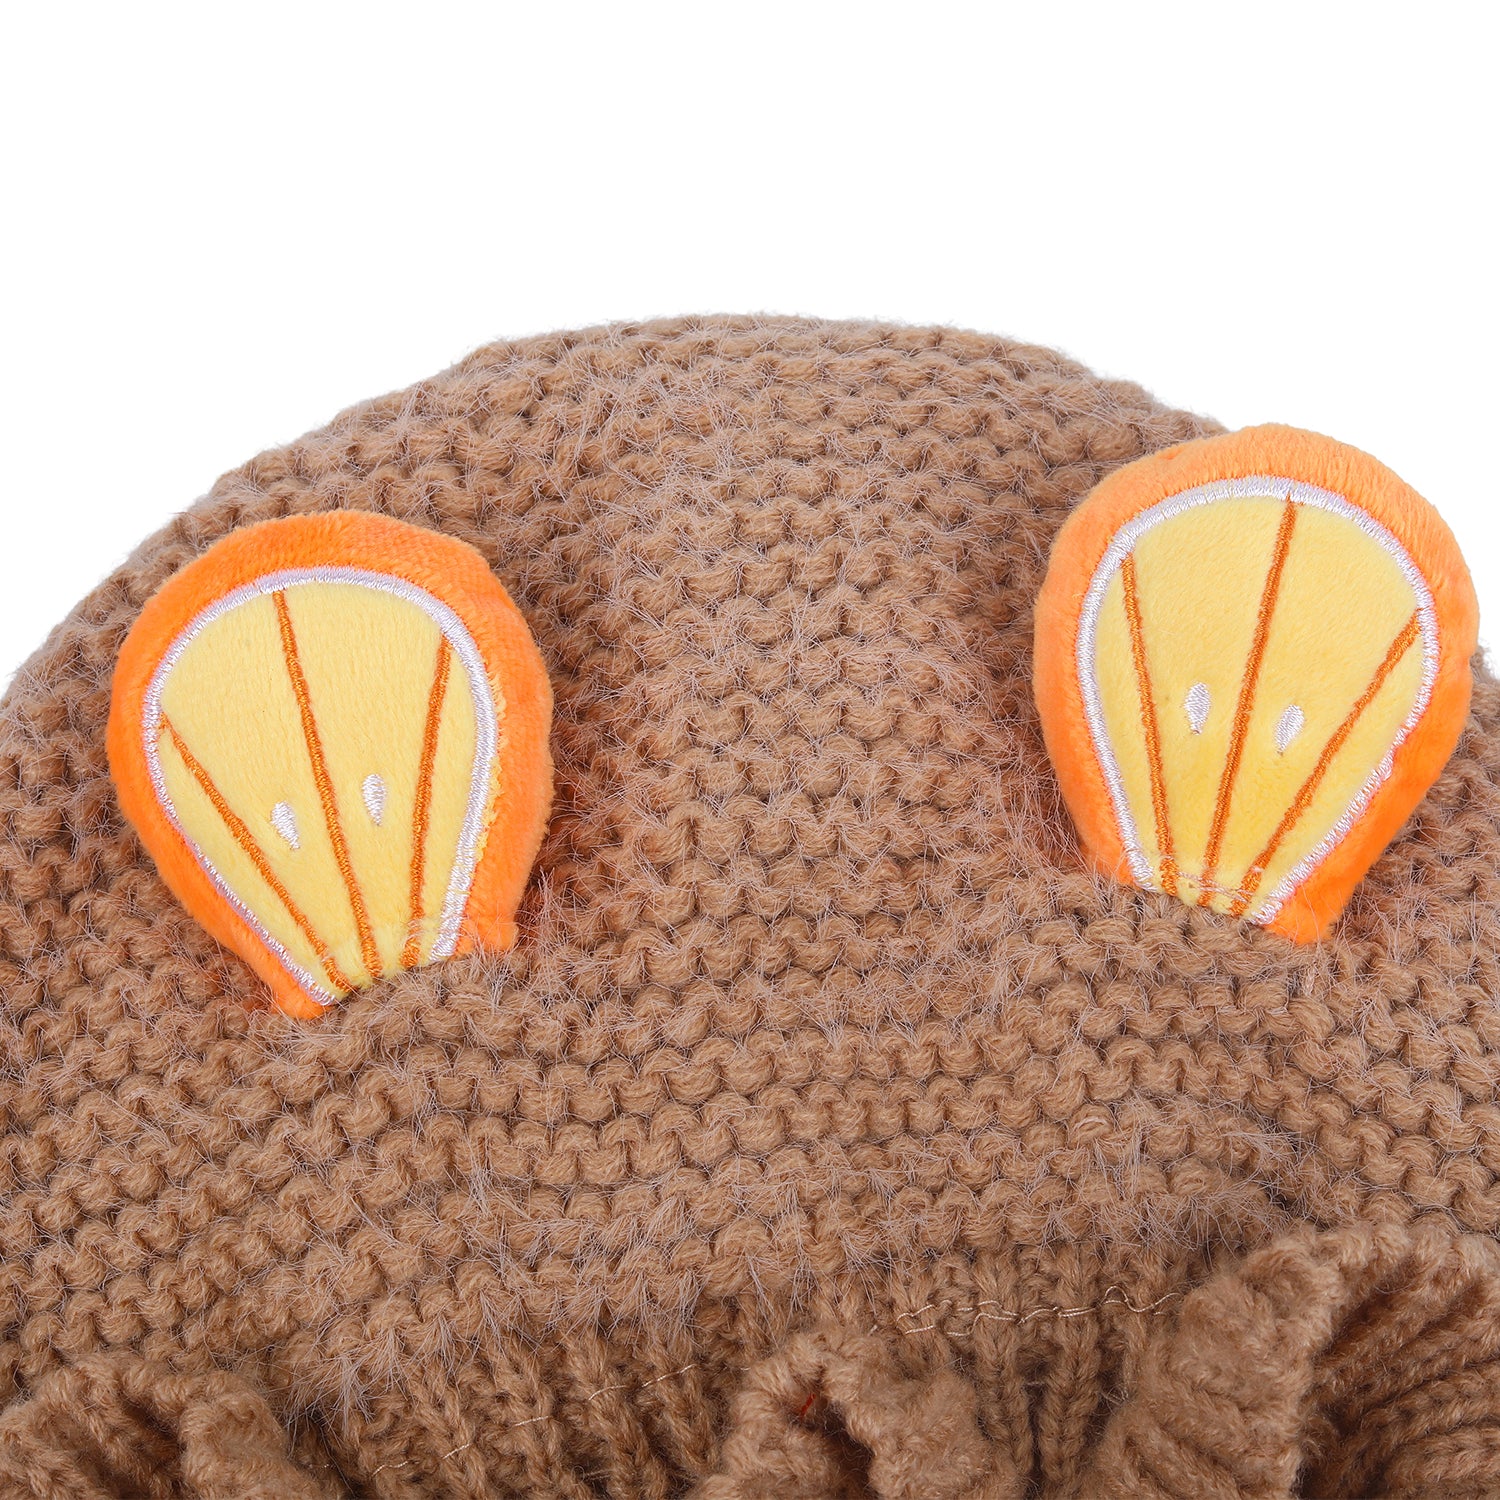 Baby Moo 3D Orange Ear With Tie Knot For Ear Cover Knitted Woolen Cap - Brown